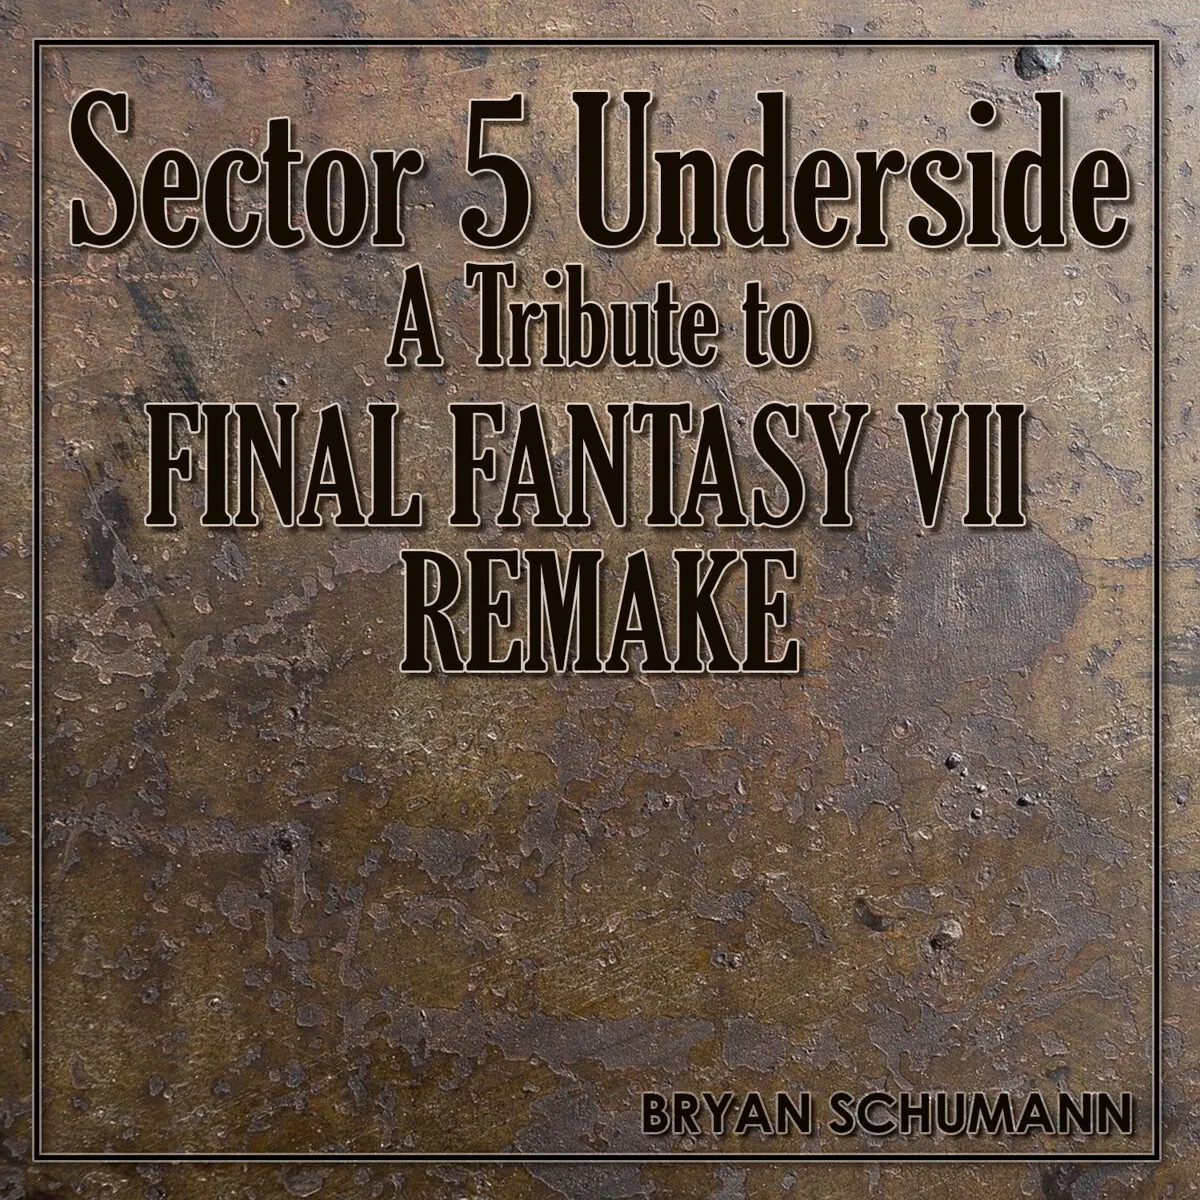 Sector 5 Underside: A Tribute to Final Fantasy VII Remake (audio download)